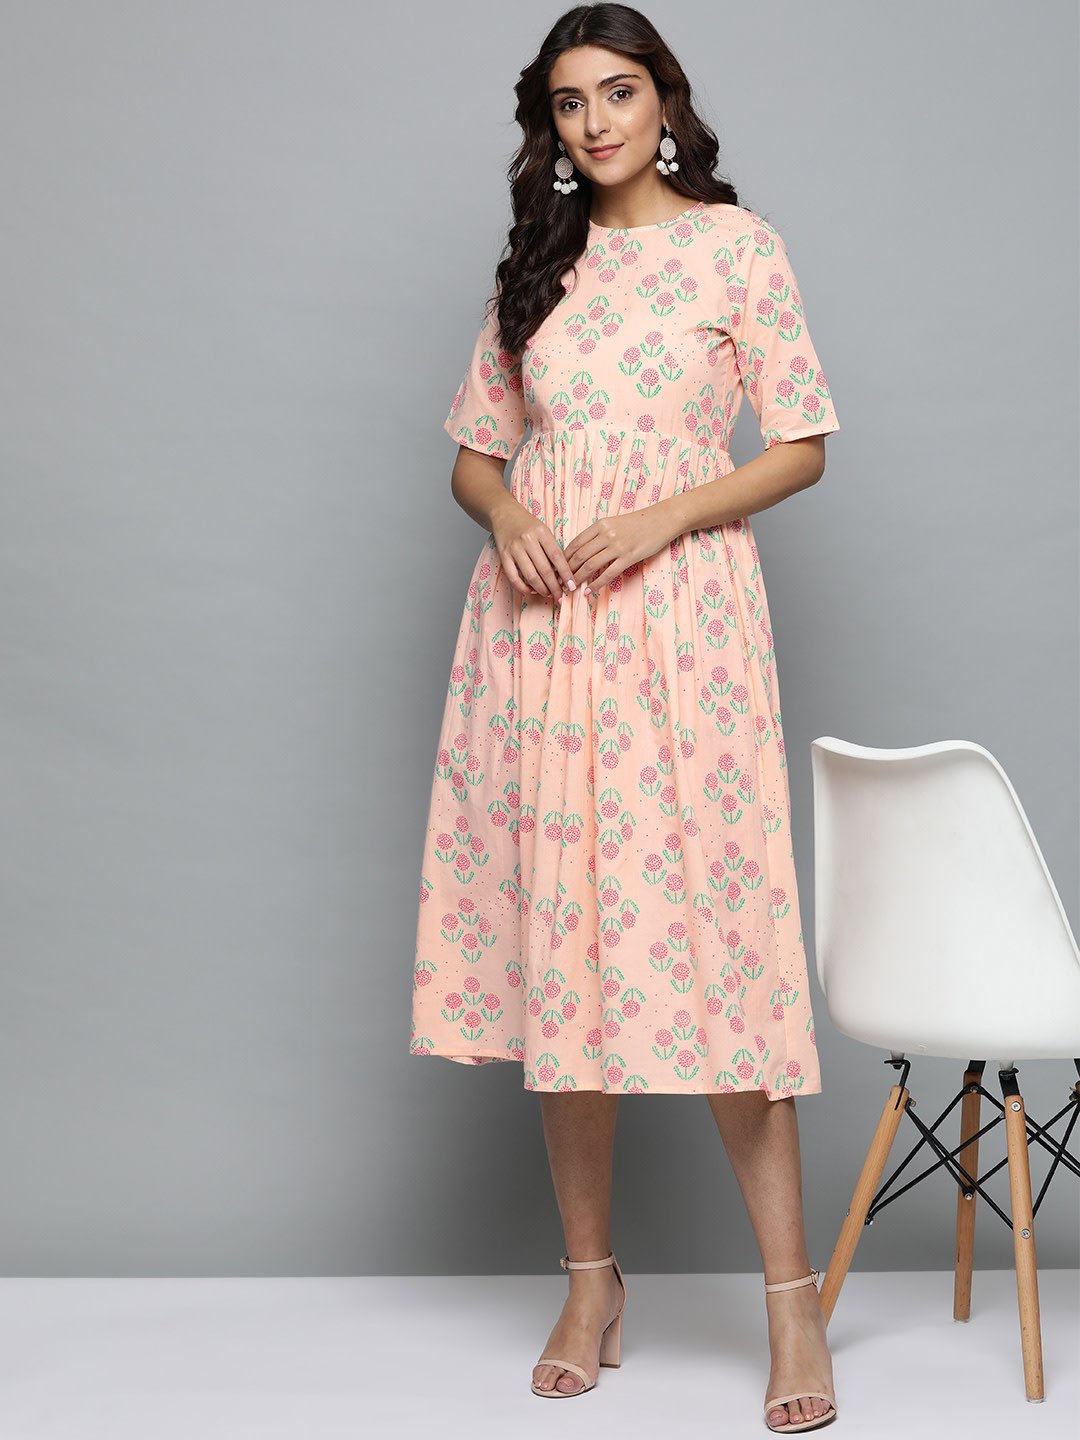 Women's Peach Floral Printed Round Neck A-Line Dress - Nayo Clothing